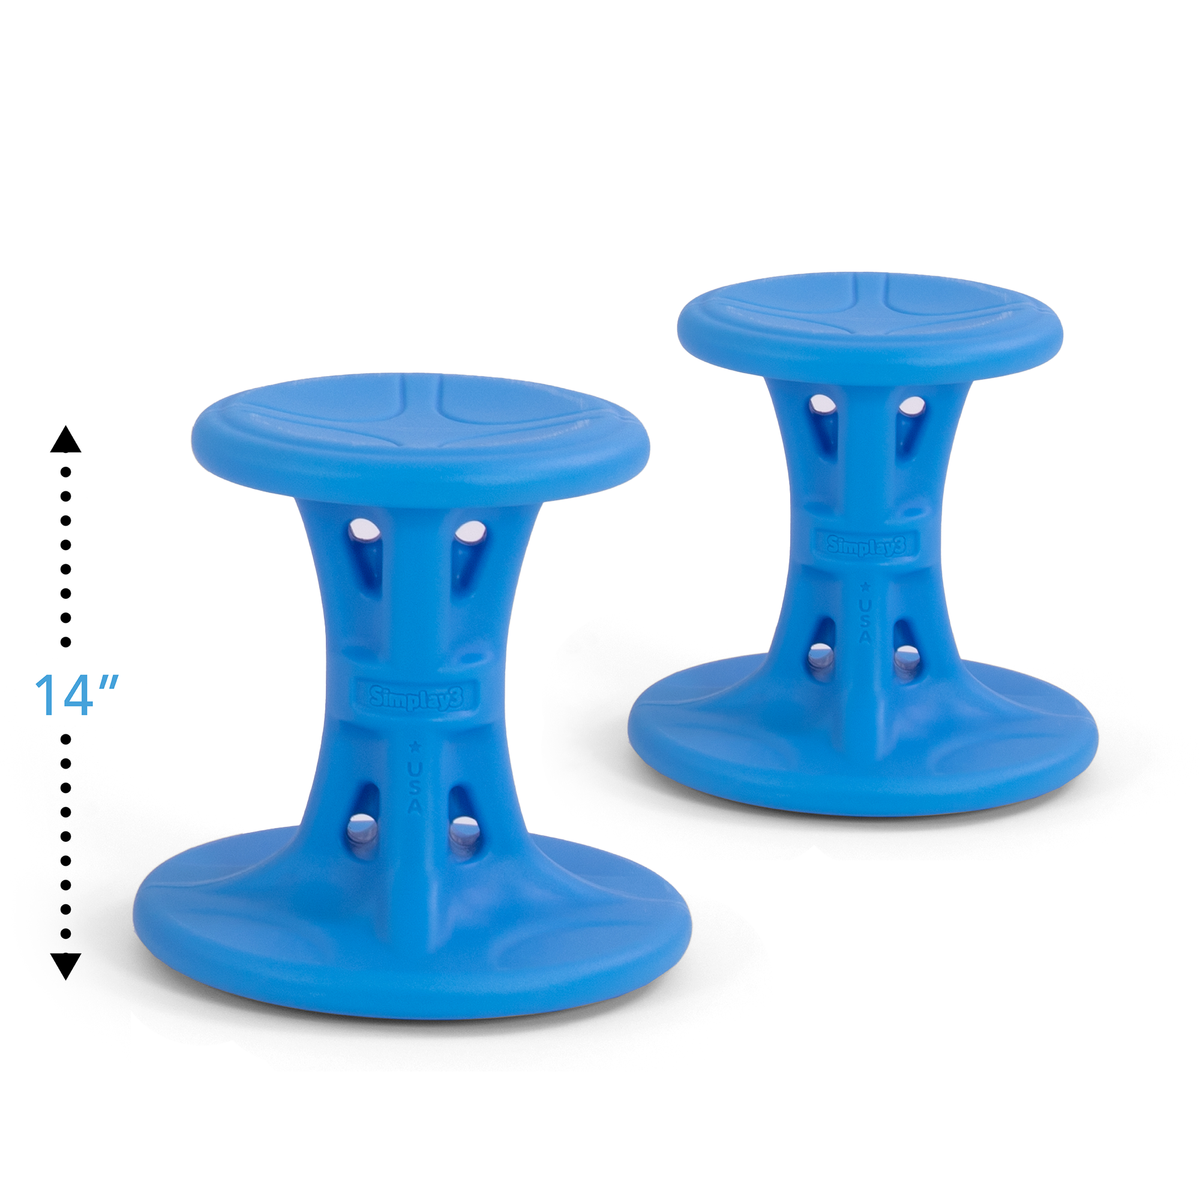 Simplay3 Big Wiggle Chair comes in a one or two pack